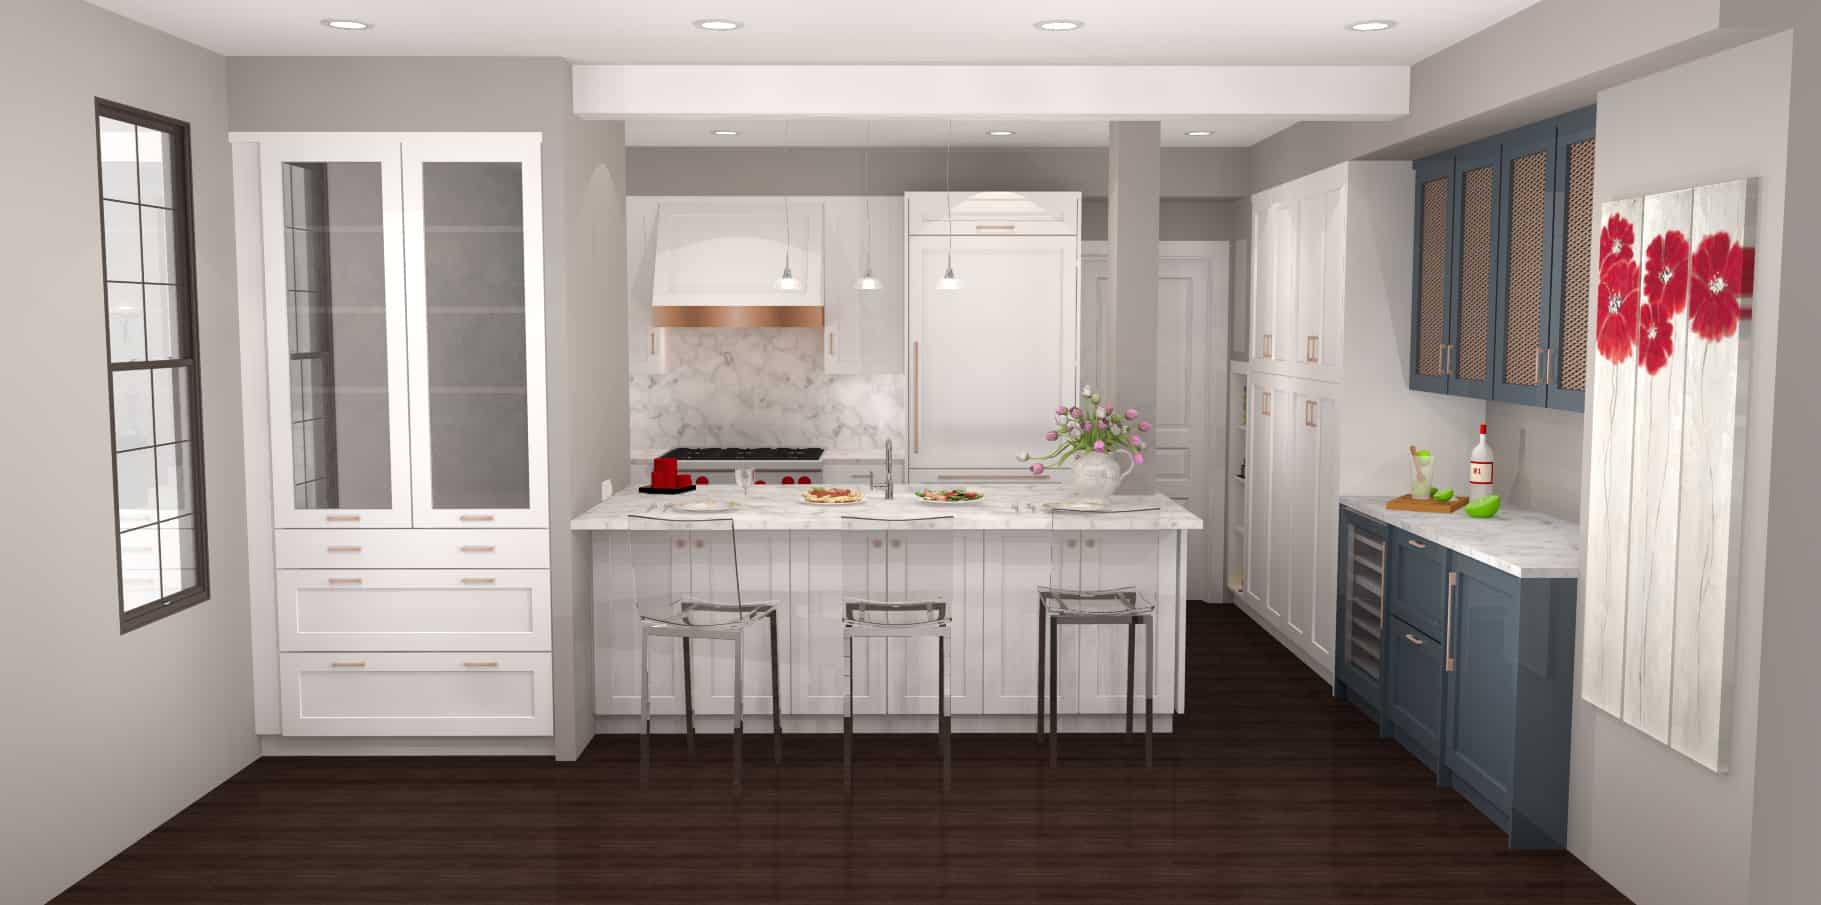 Kitchen with two-toned white and slate blue combination of cabinets